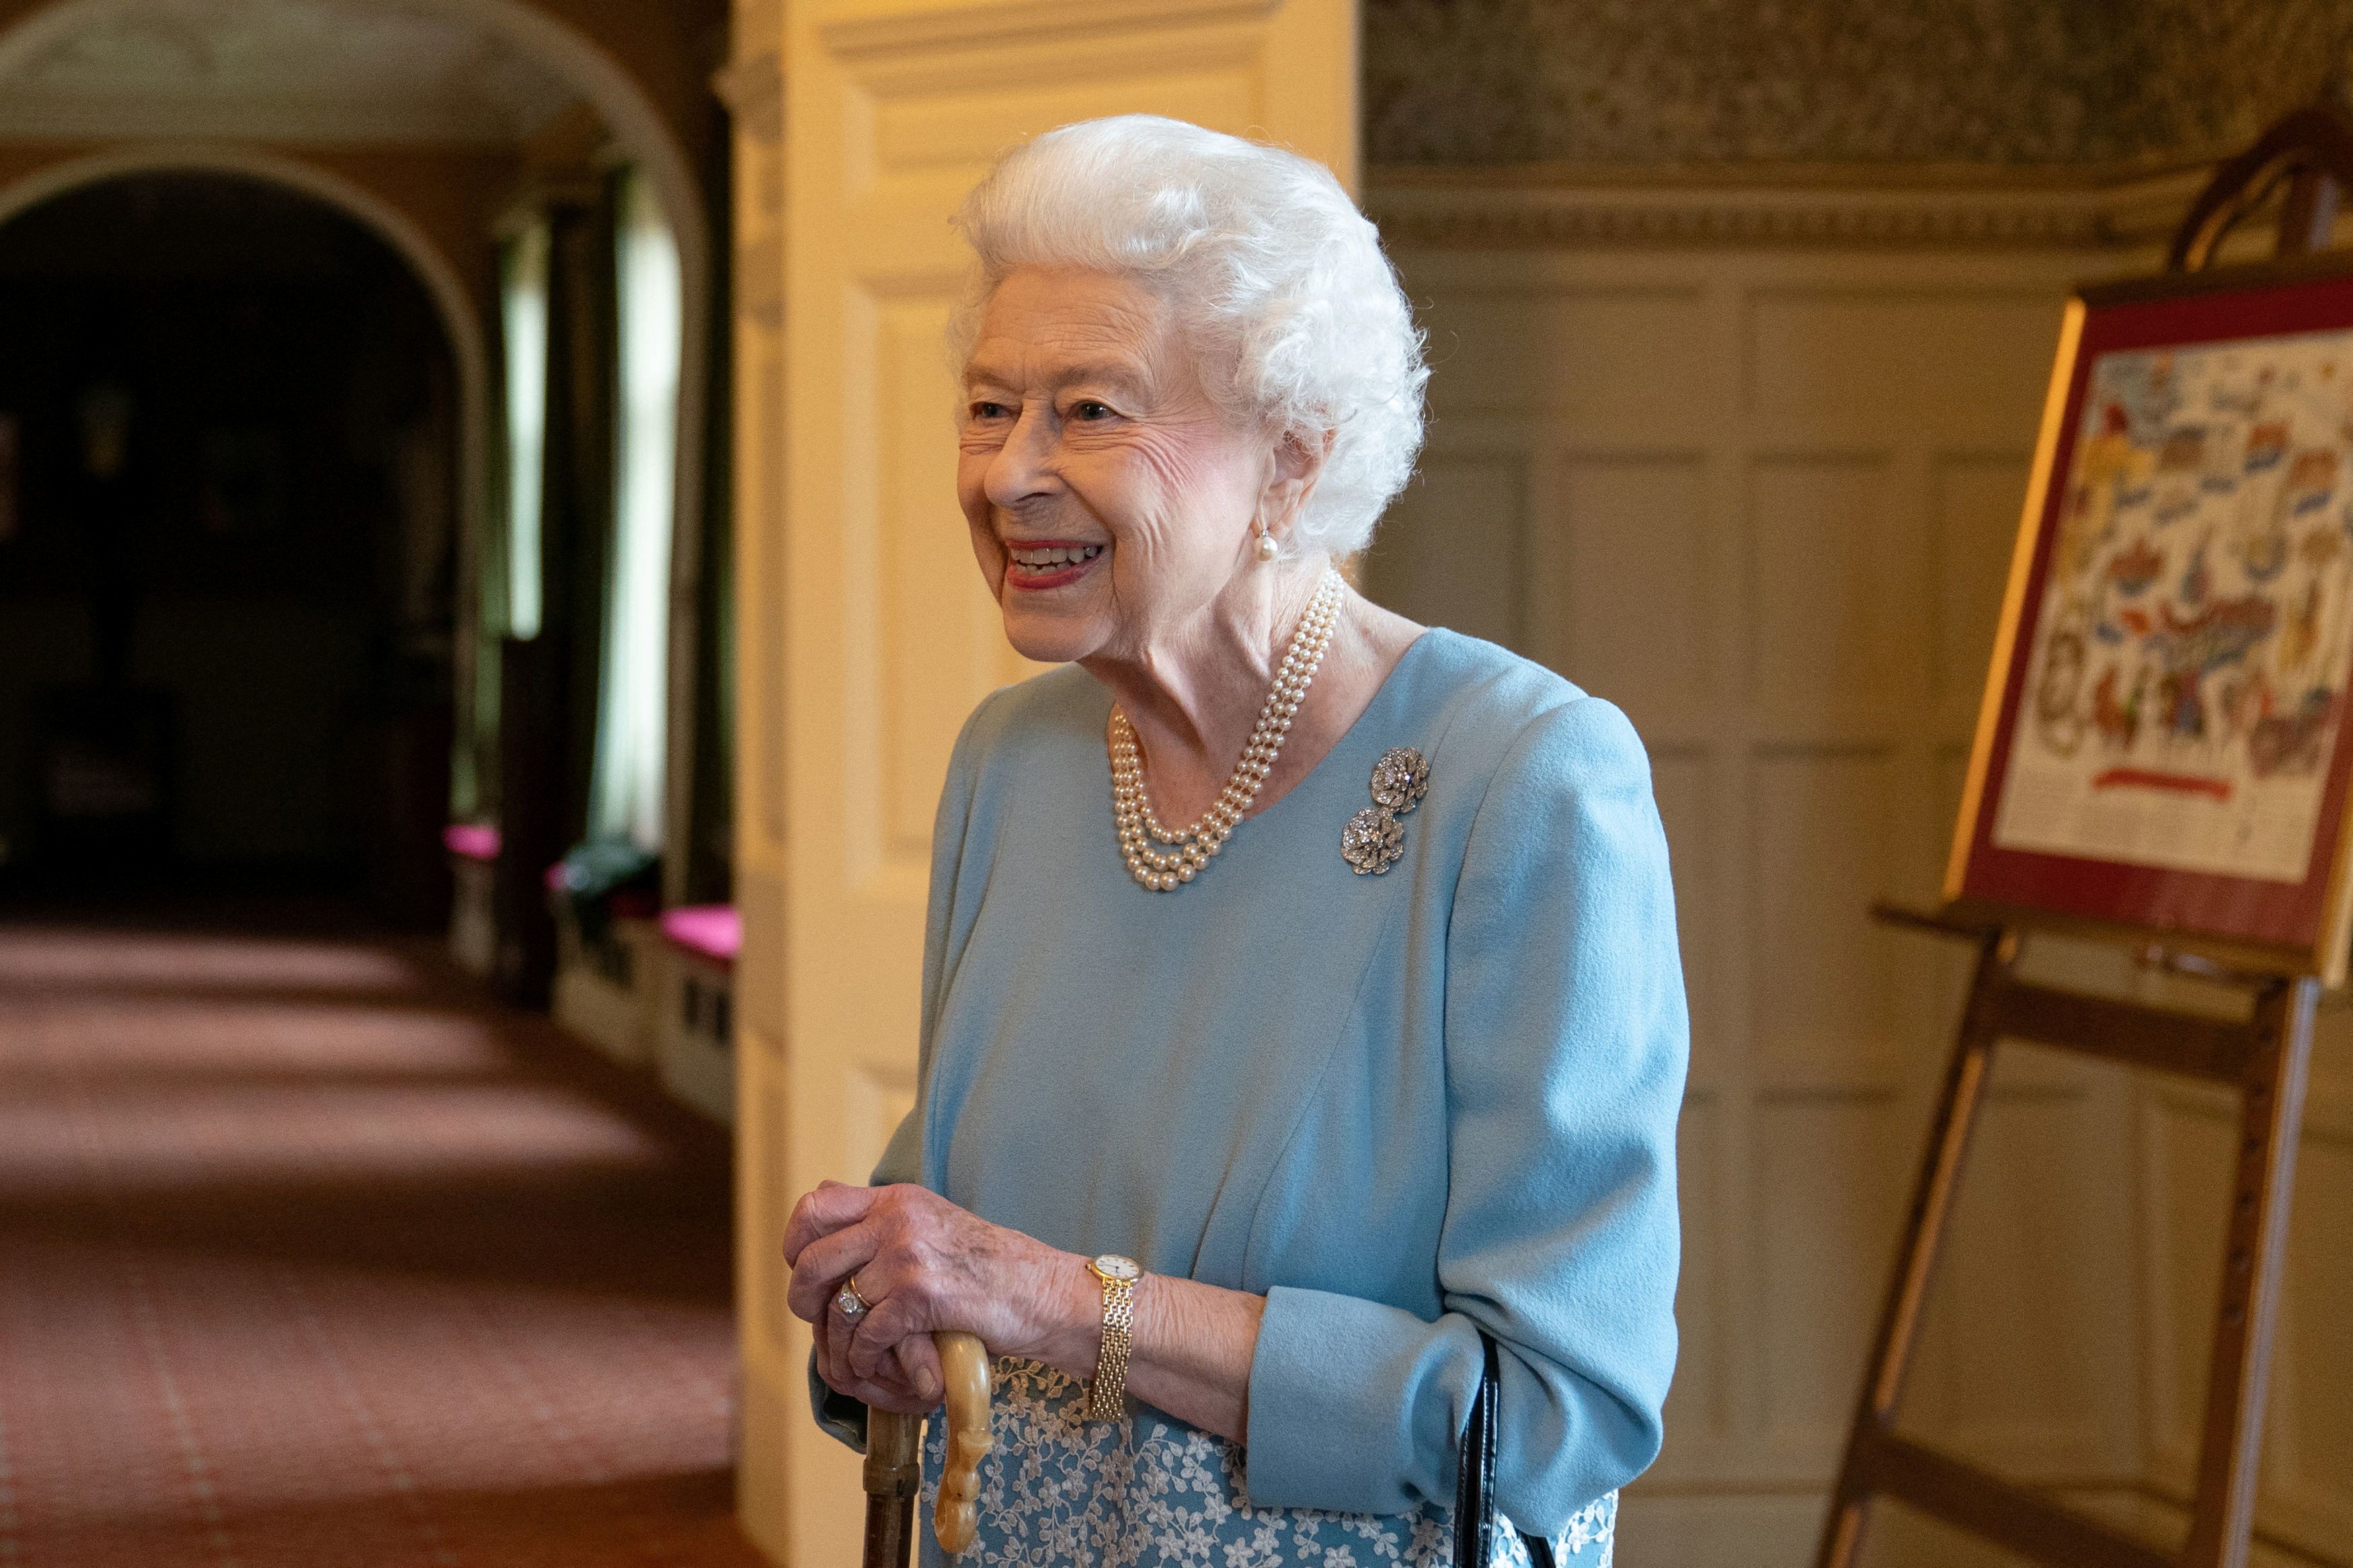 Britain's Queen Elizabeth reacts as she attends a reception in the Ballroom of Sandringham House to celebrate the start of the Platinum Jubilee, in Sandringham, Britain, February 5, 2022. Joe Giddens/ Pool via REUTERS